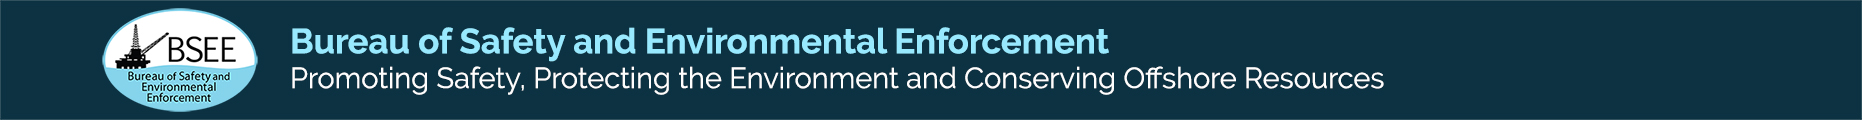 [US Department of the Interior Bureau of Safety and Environmental Enforcement] Member Portal banner